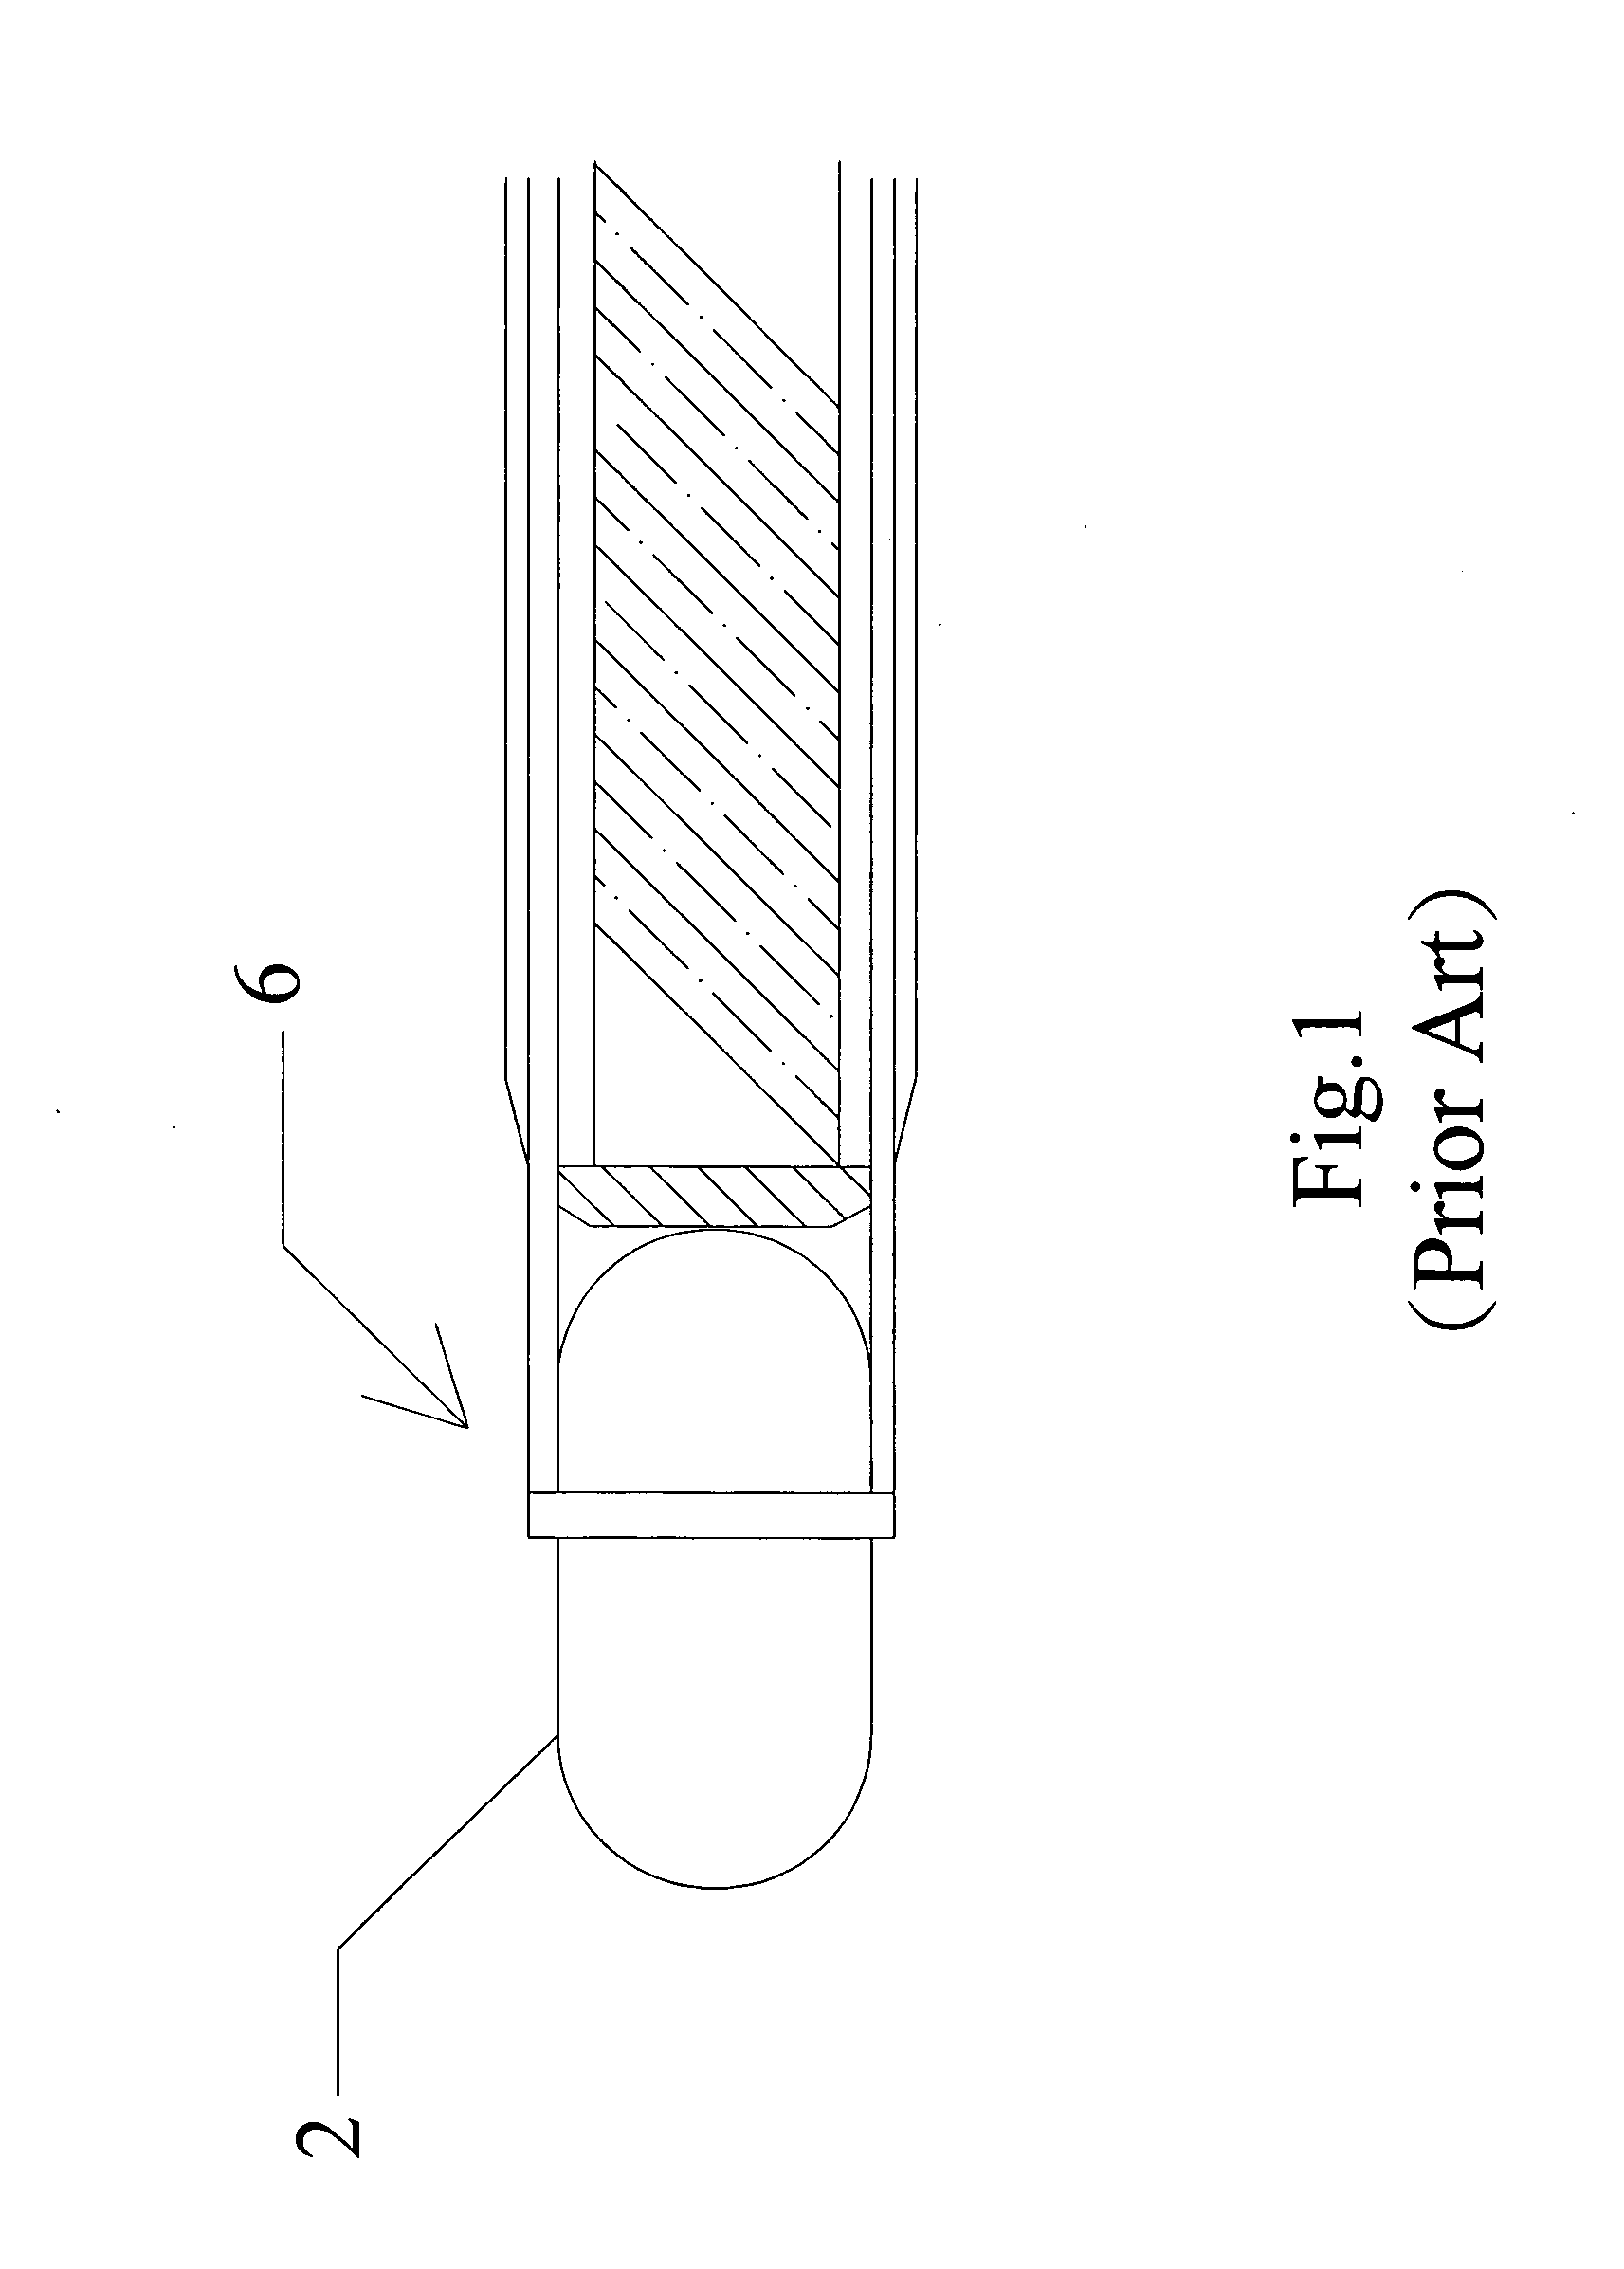 Capsular endoscope device with an orientation/release mechanism